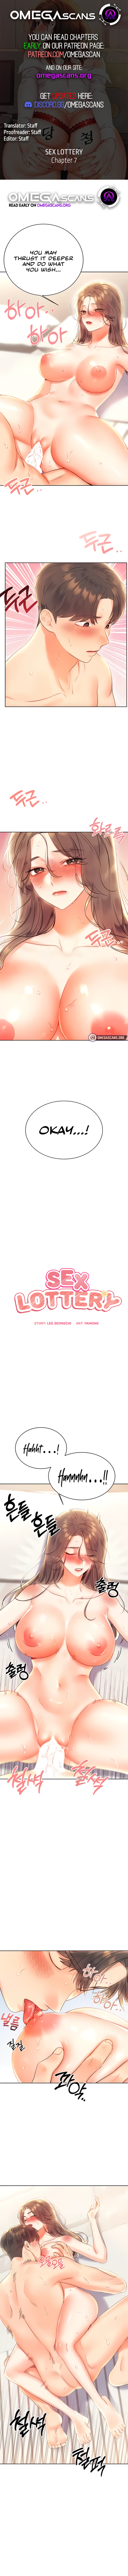 Sex Lottery image